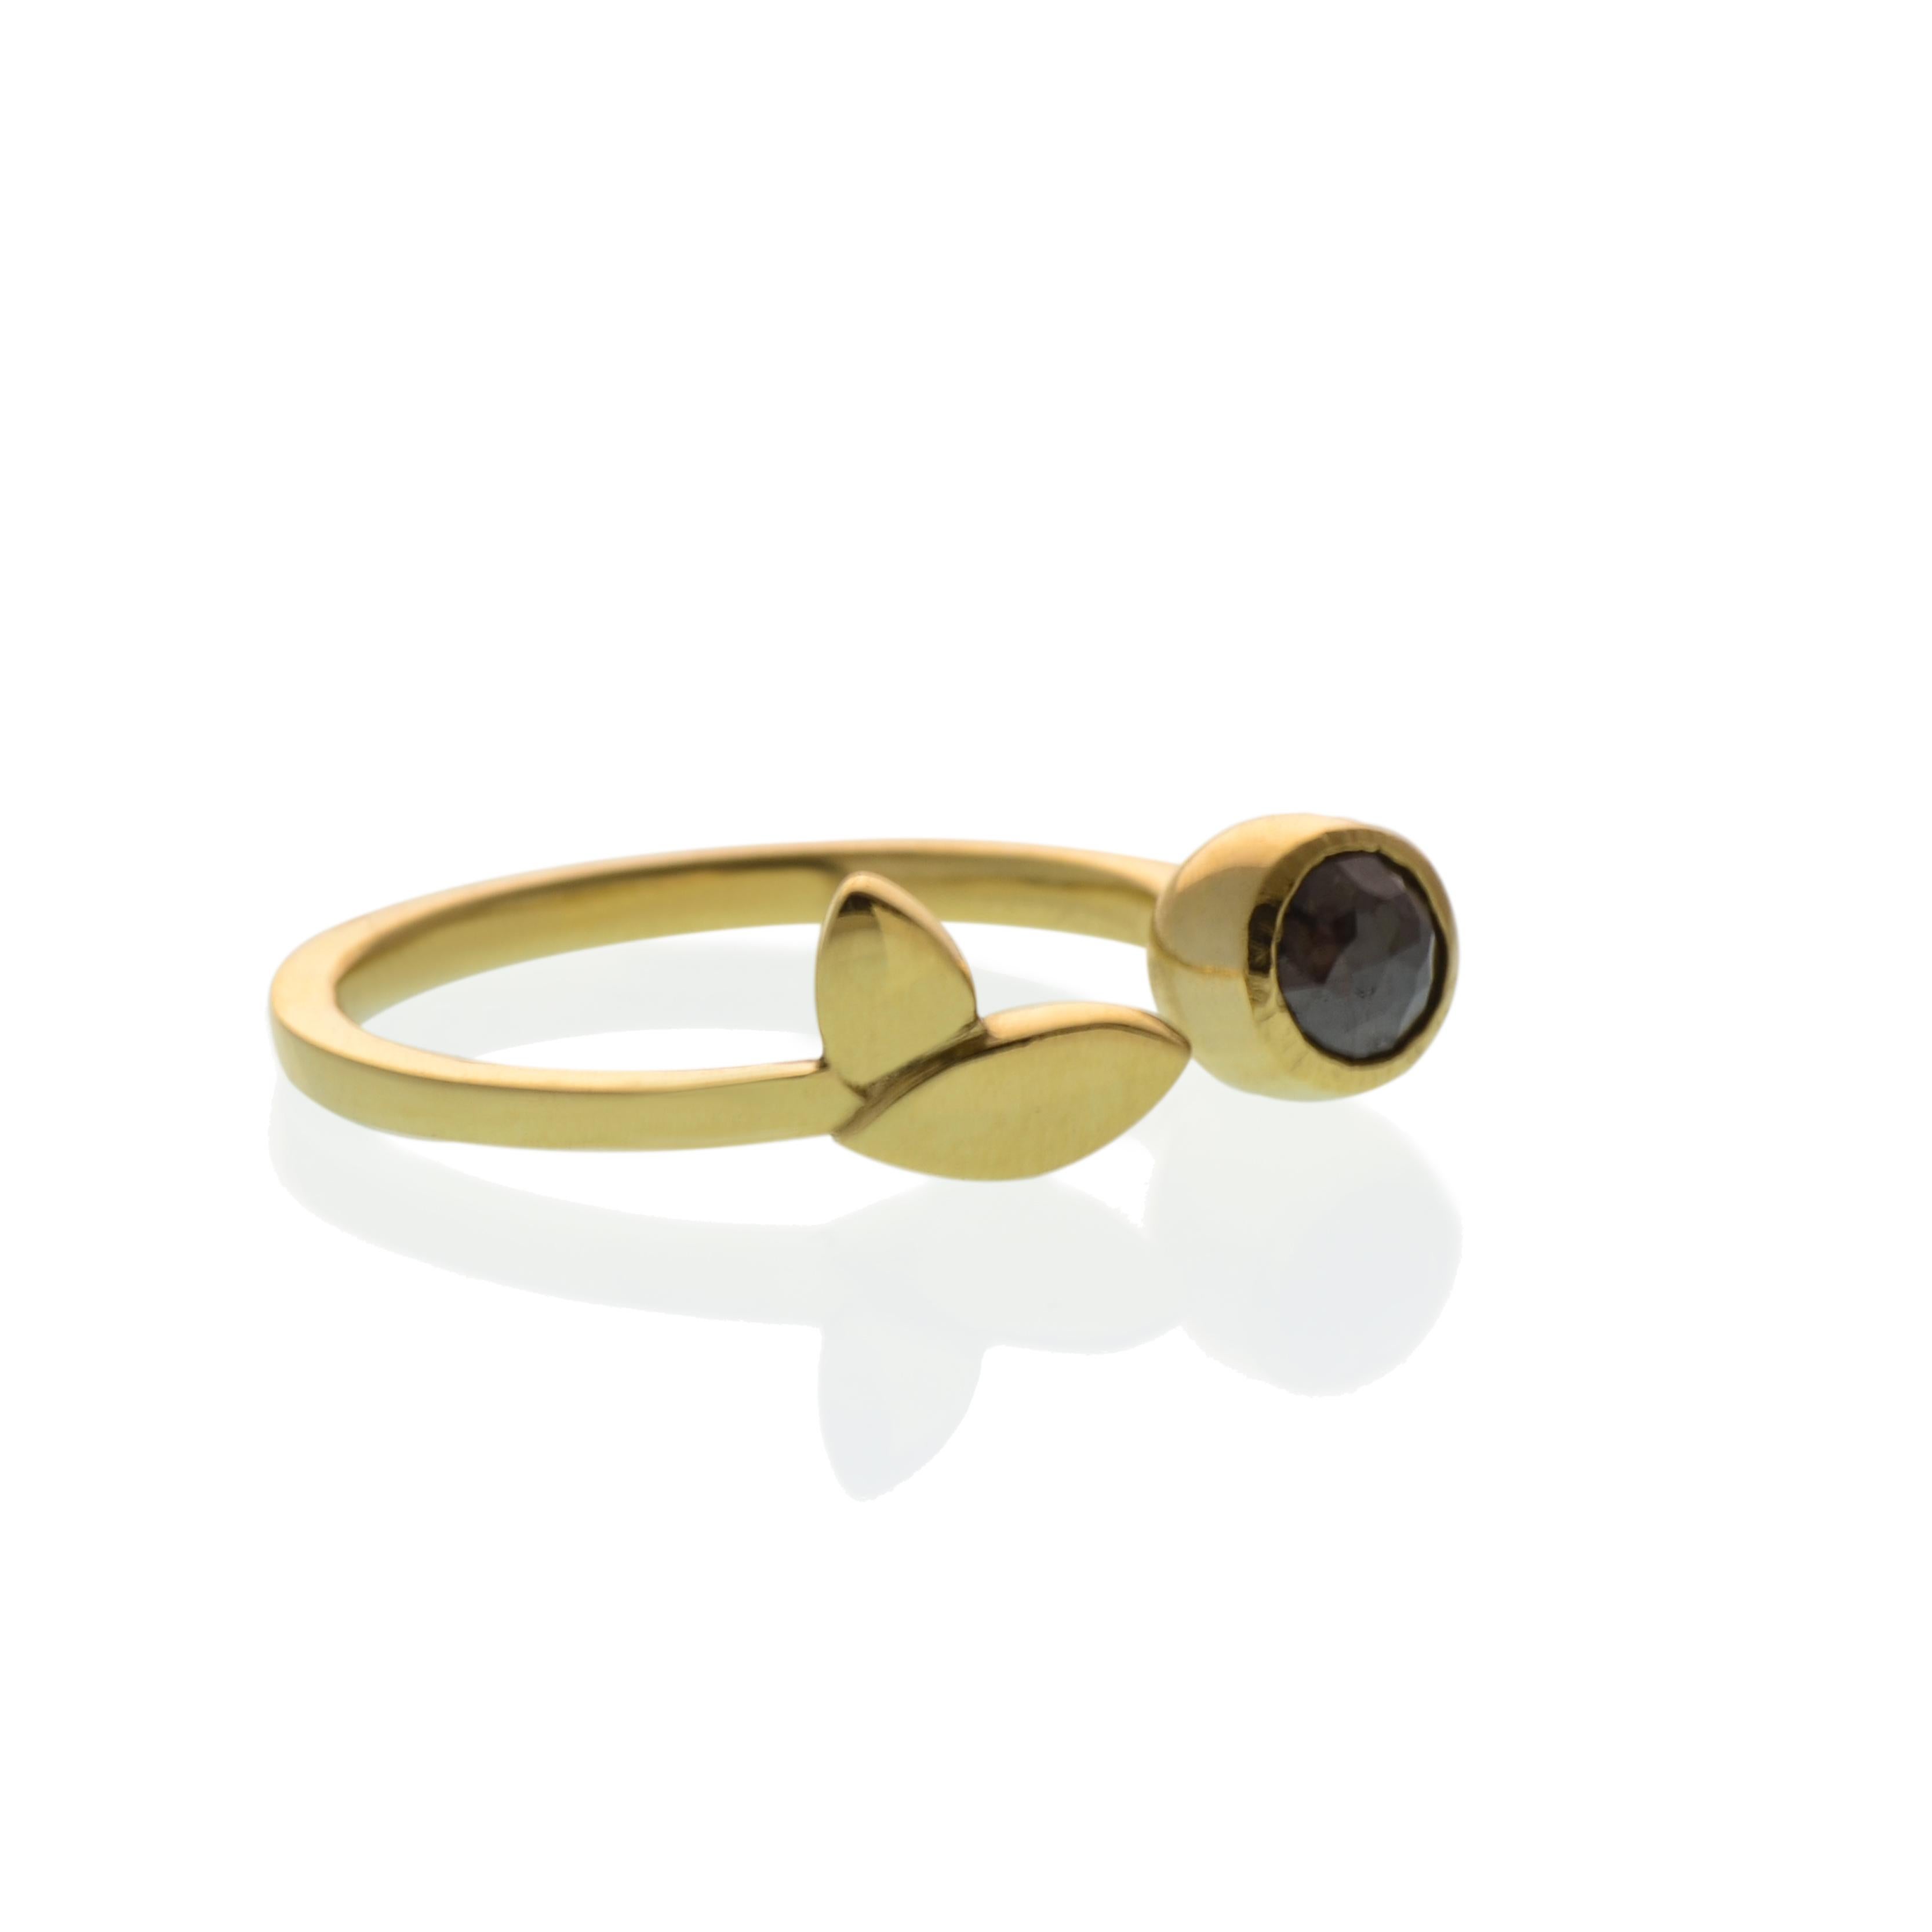 Our Gold and Black Diamond Flora Leaf Ring is reminiscent of a garden twig wrapped around your finger on a warm summer day. The diamond is a dark charcoal colored rose cut diamond surrounded by a cup of gold that is integrated into the ring. Open on